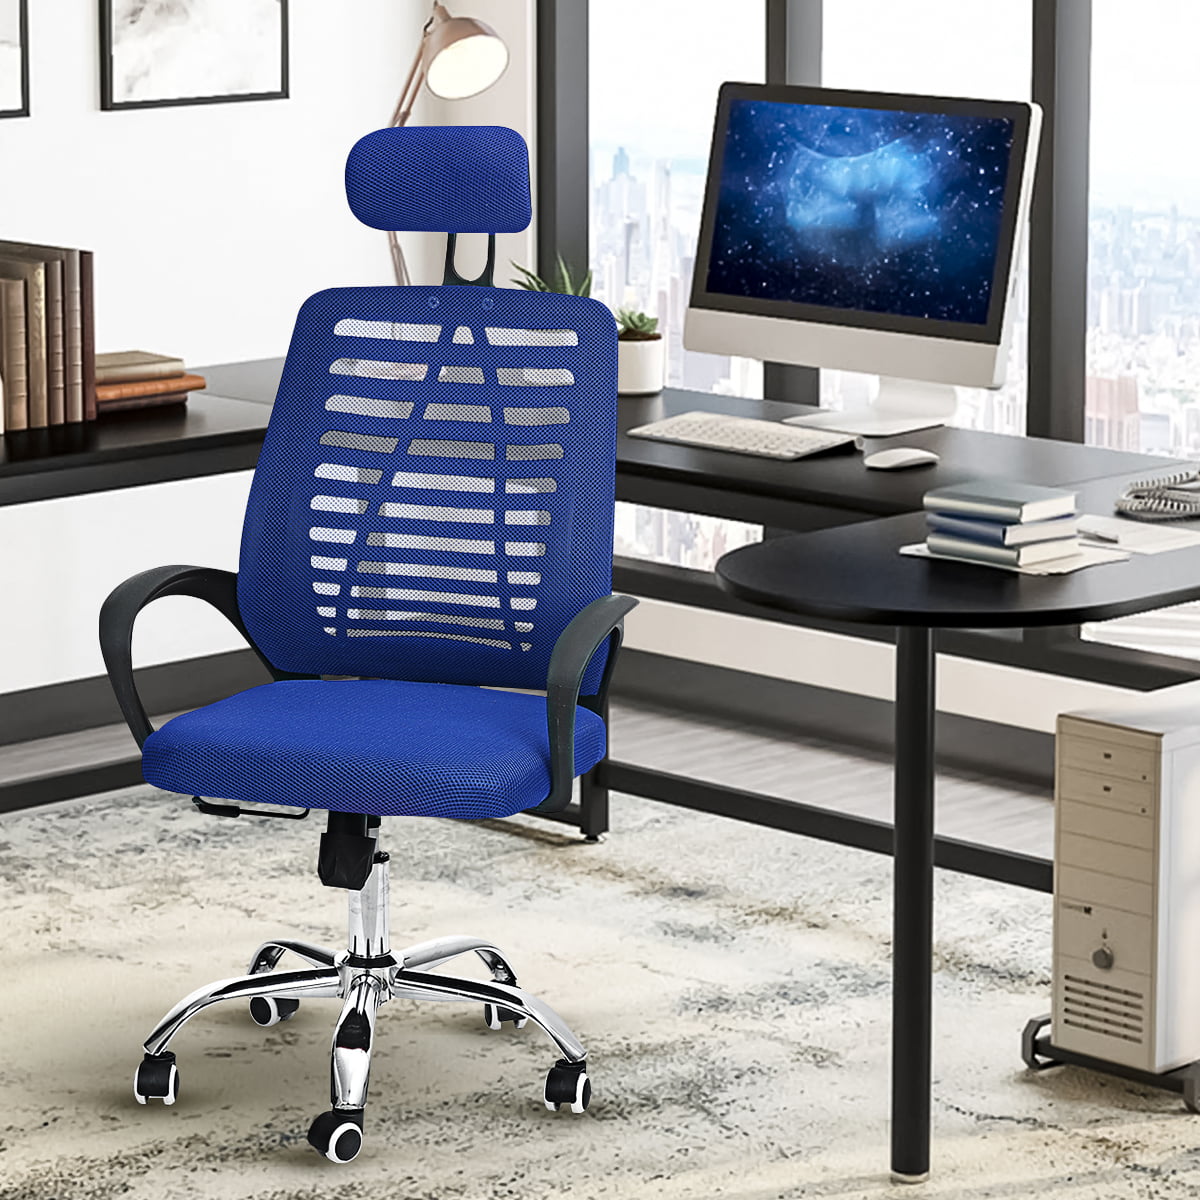 Details about   Ergonomic Mesh Office Chair Adjustable Desk Chair Swivel Chair Computer Chairs 